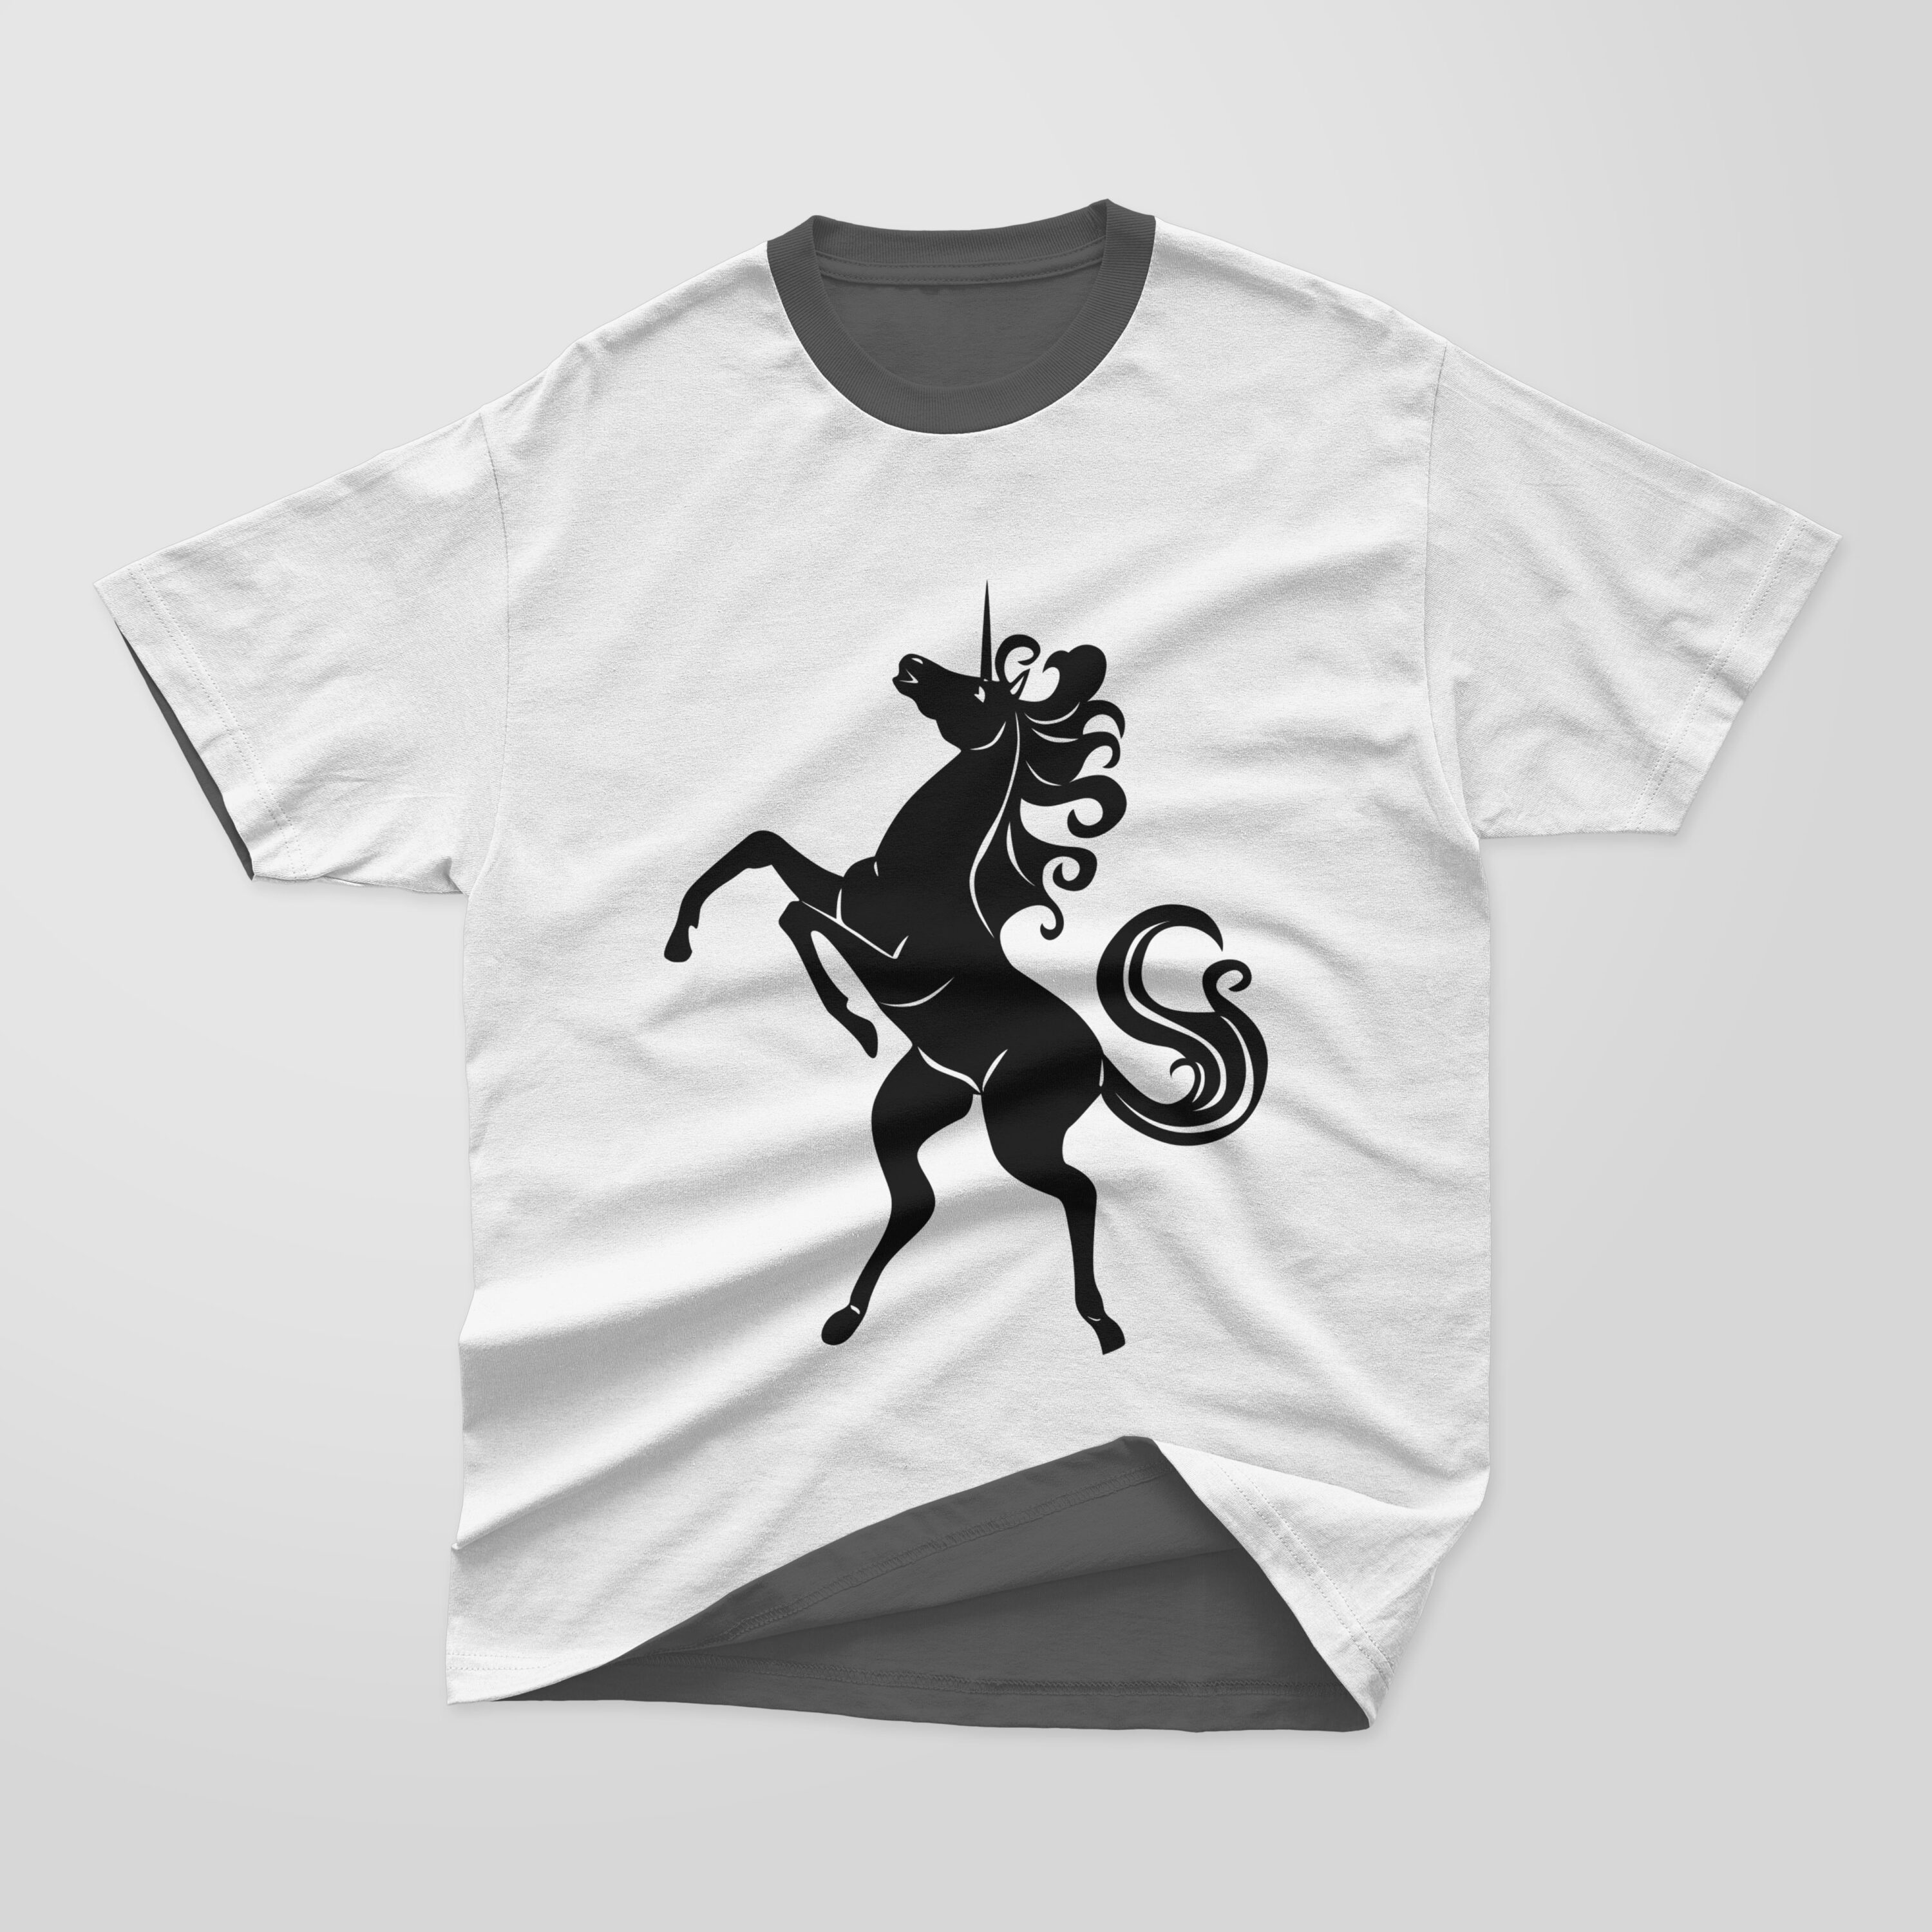 White and dark gray T-shirt with a dark gray collar and a black silhouette of a flying unicorn on a gray background.